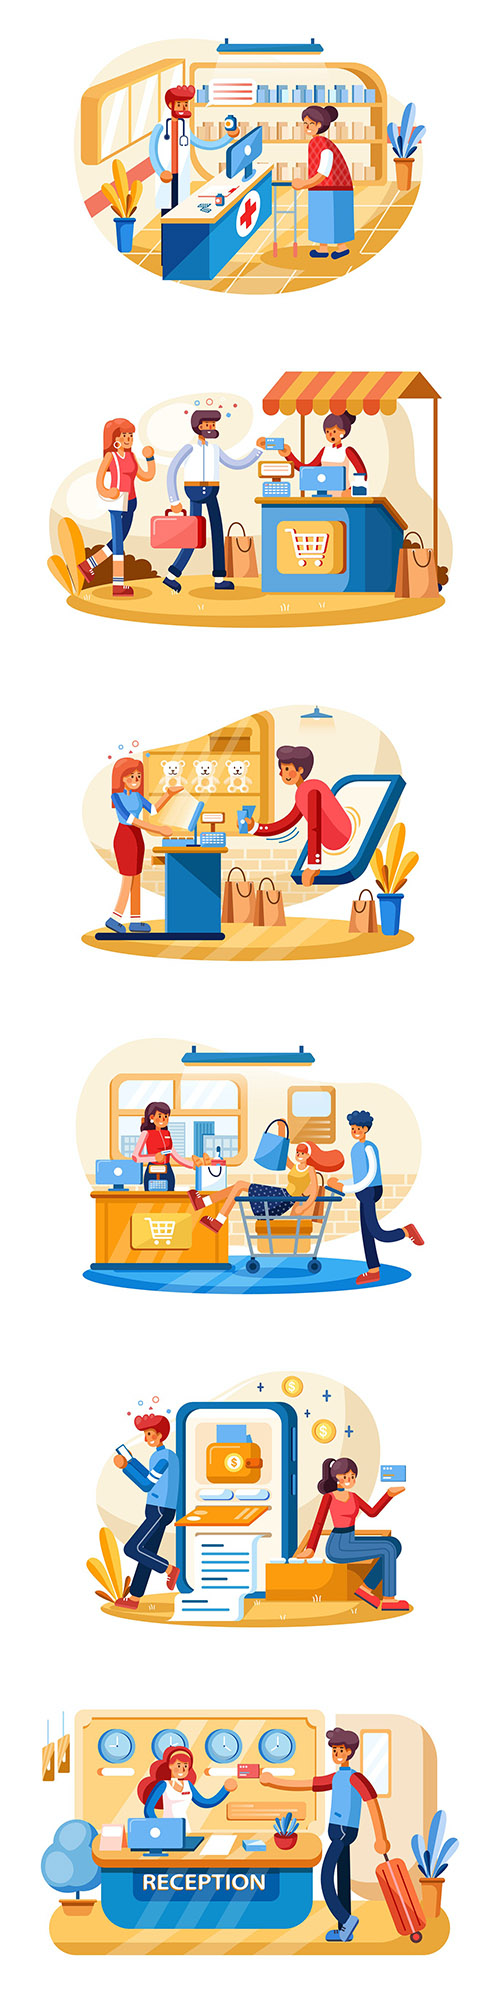 Payment System vector illustration concept